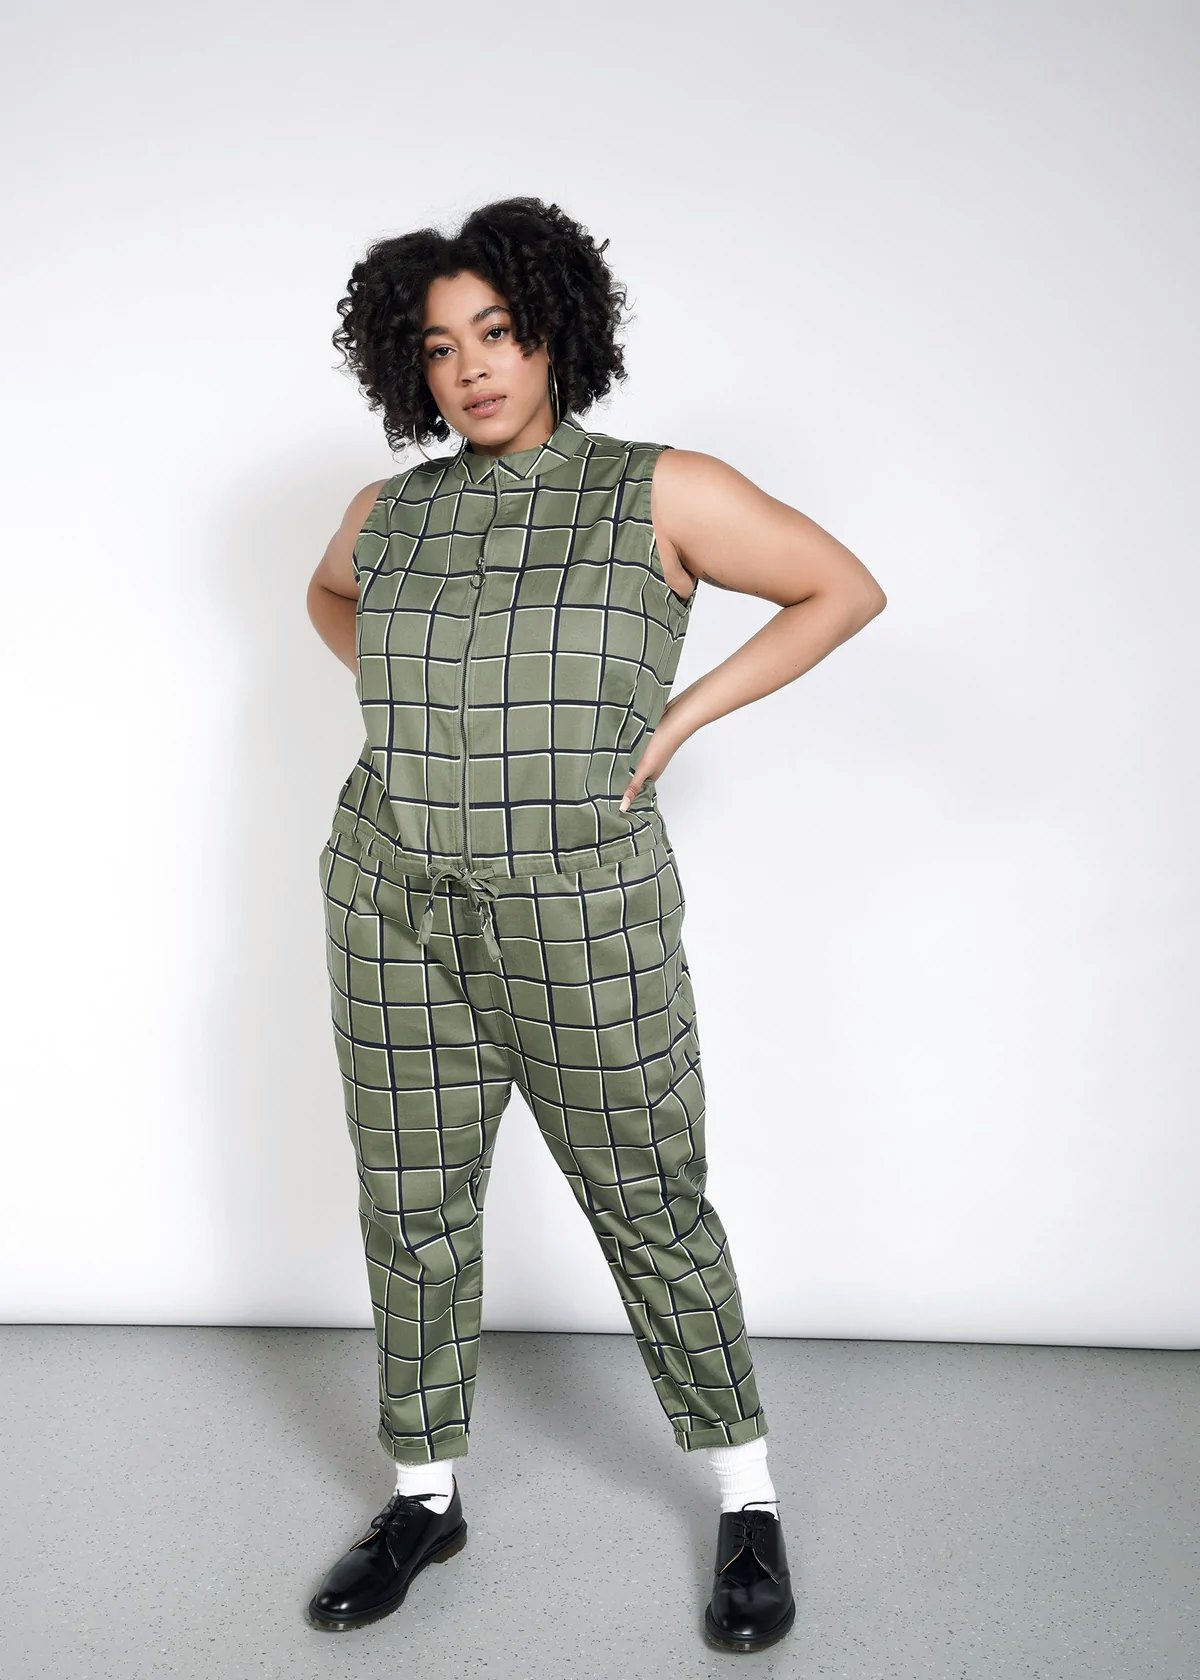 The Essential High Waisted Coverall - Wildfang